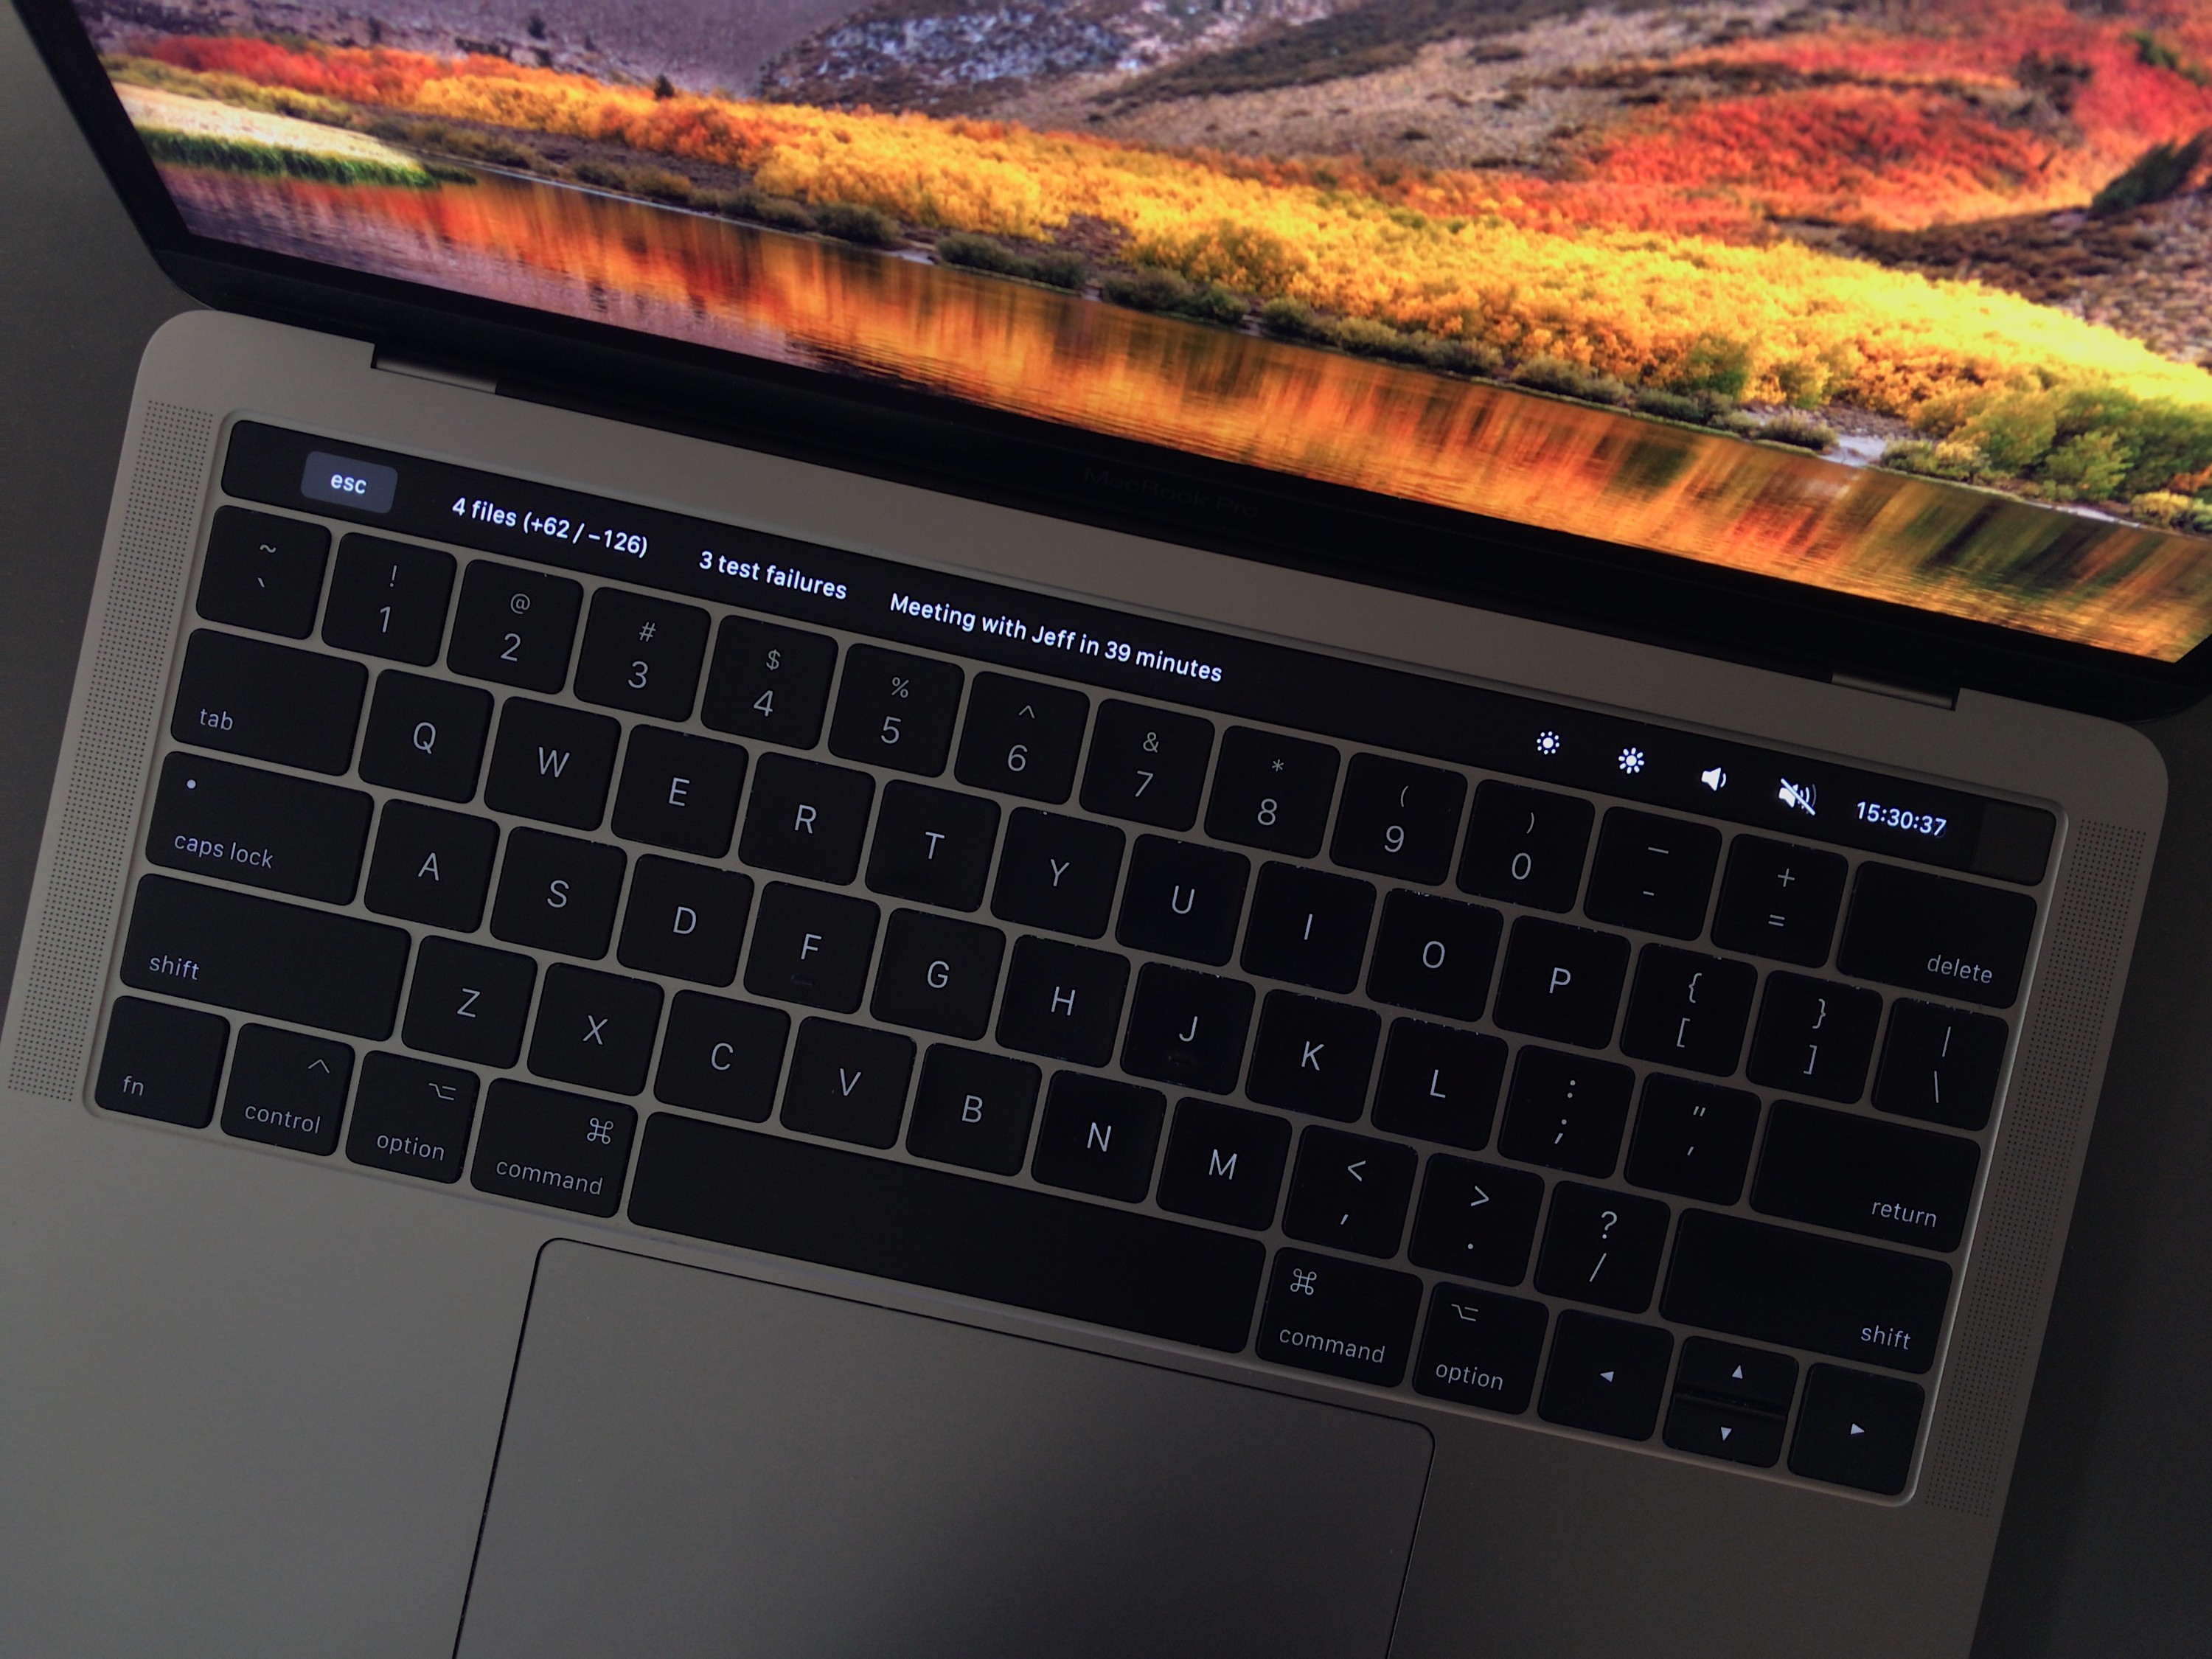 The MacBook Pro is Dead. Long Live the MacBook Pro with Touch Bar.